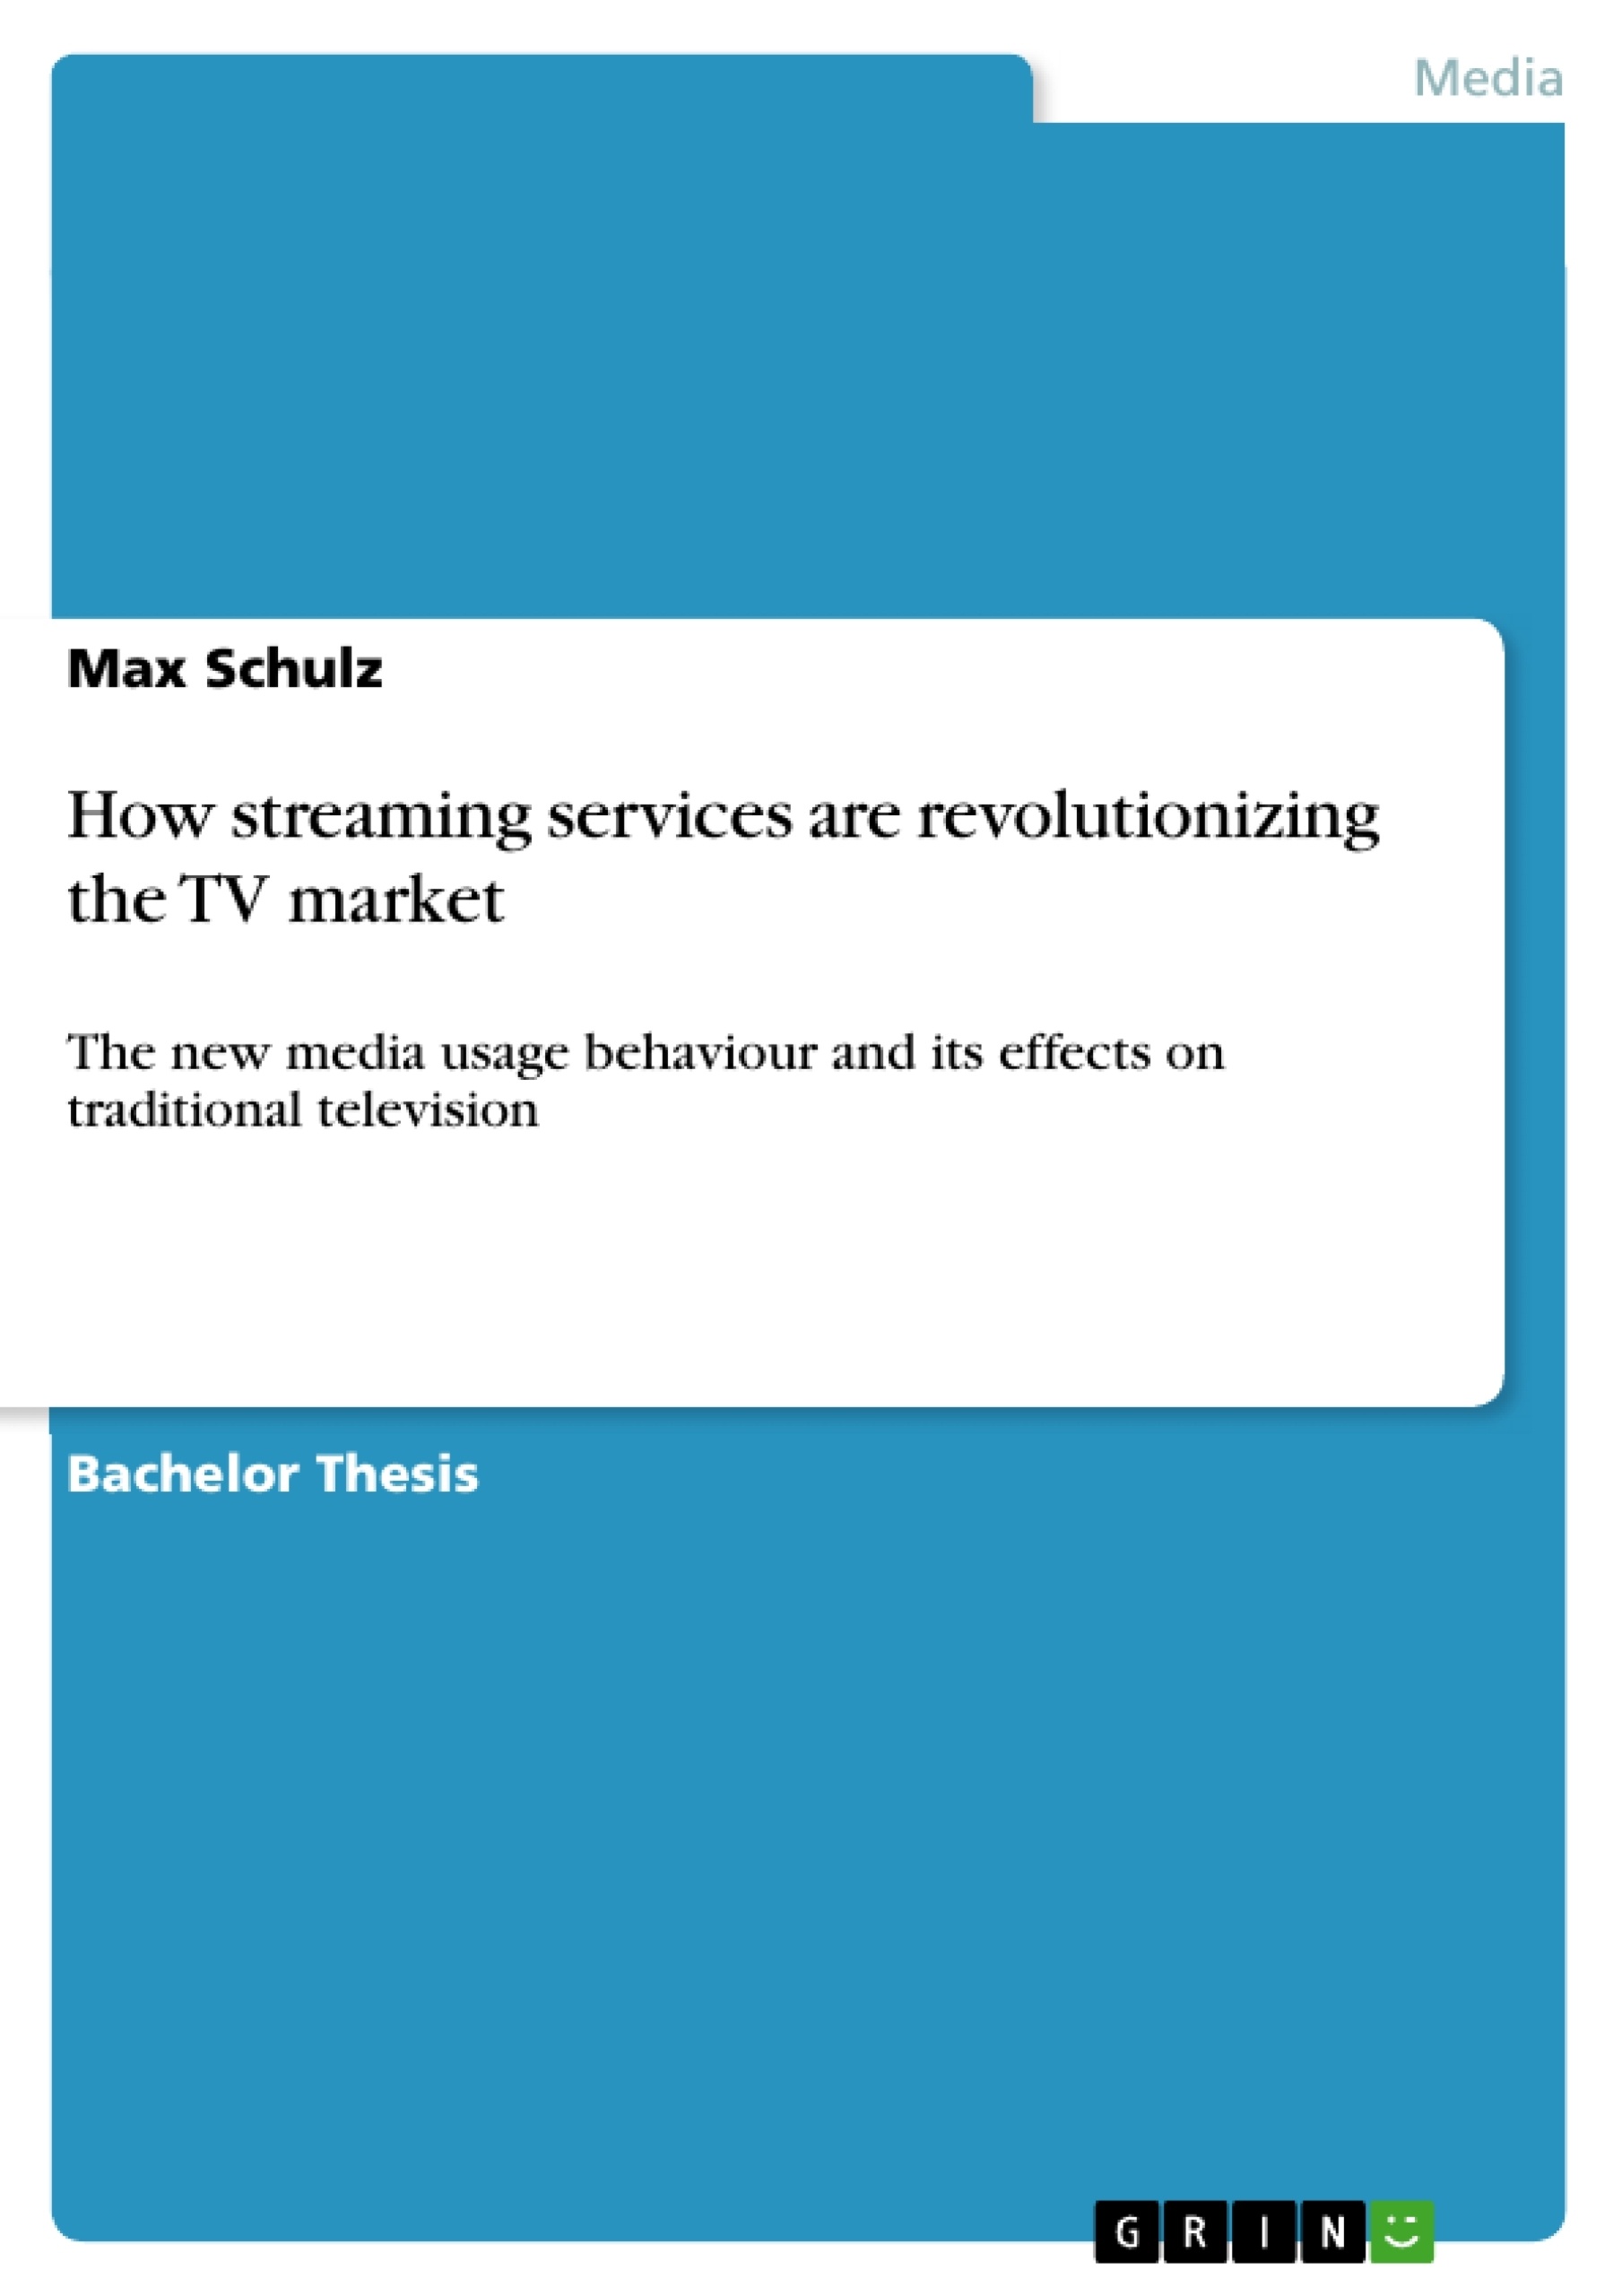 Title: How streaming services are revolutionizing the TV market